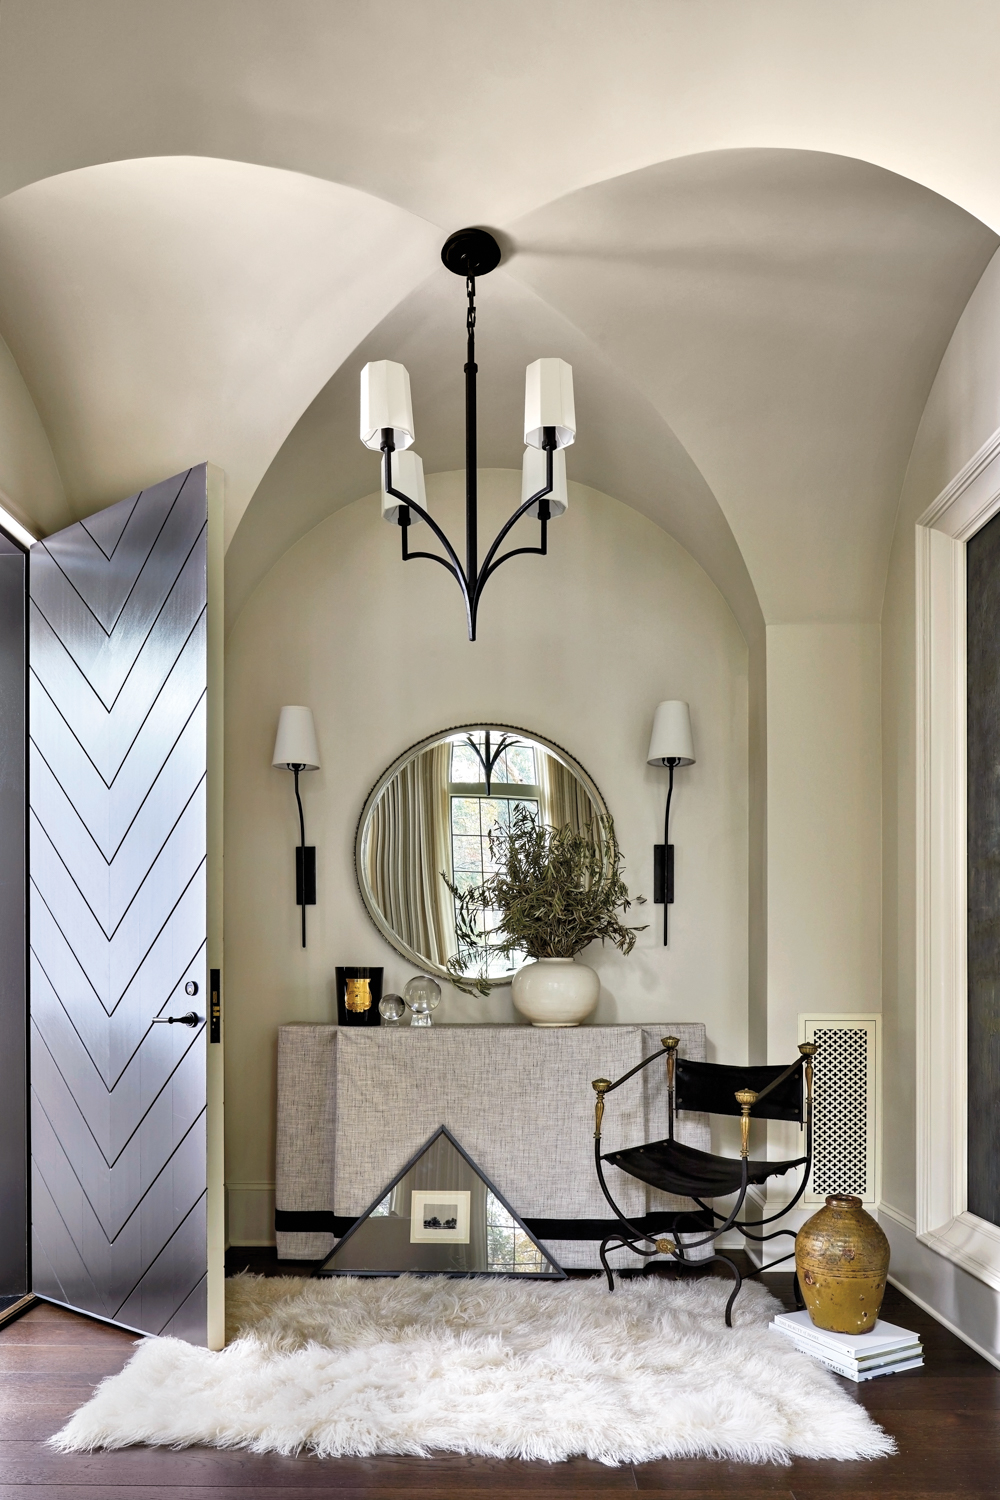 Entryway with arched ceiling details...